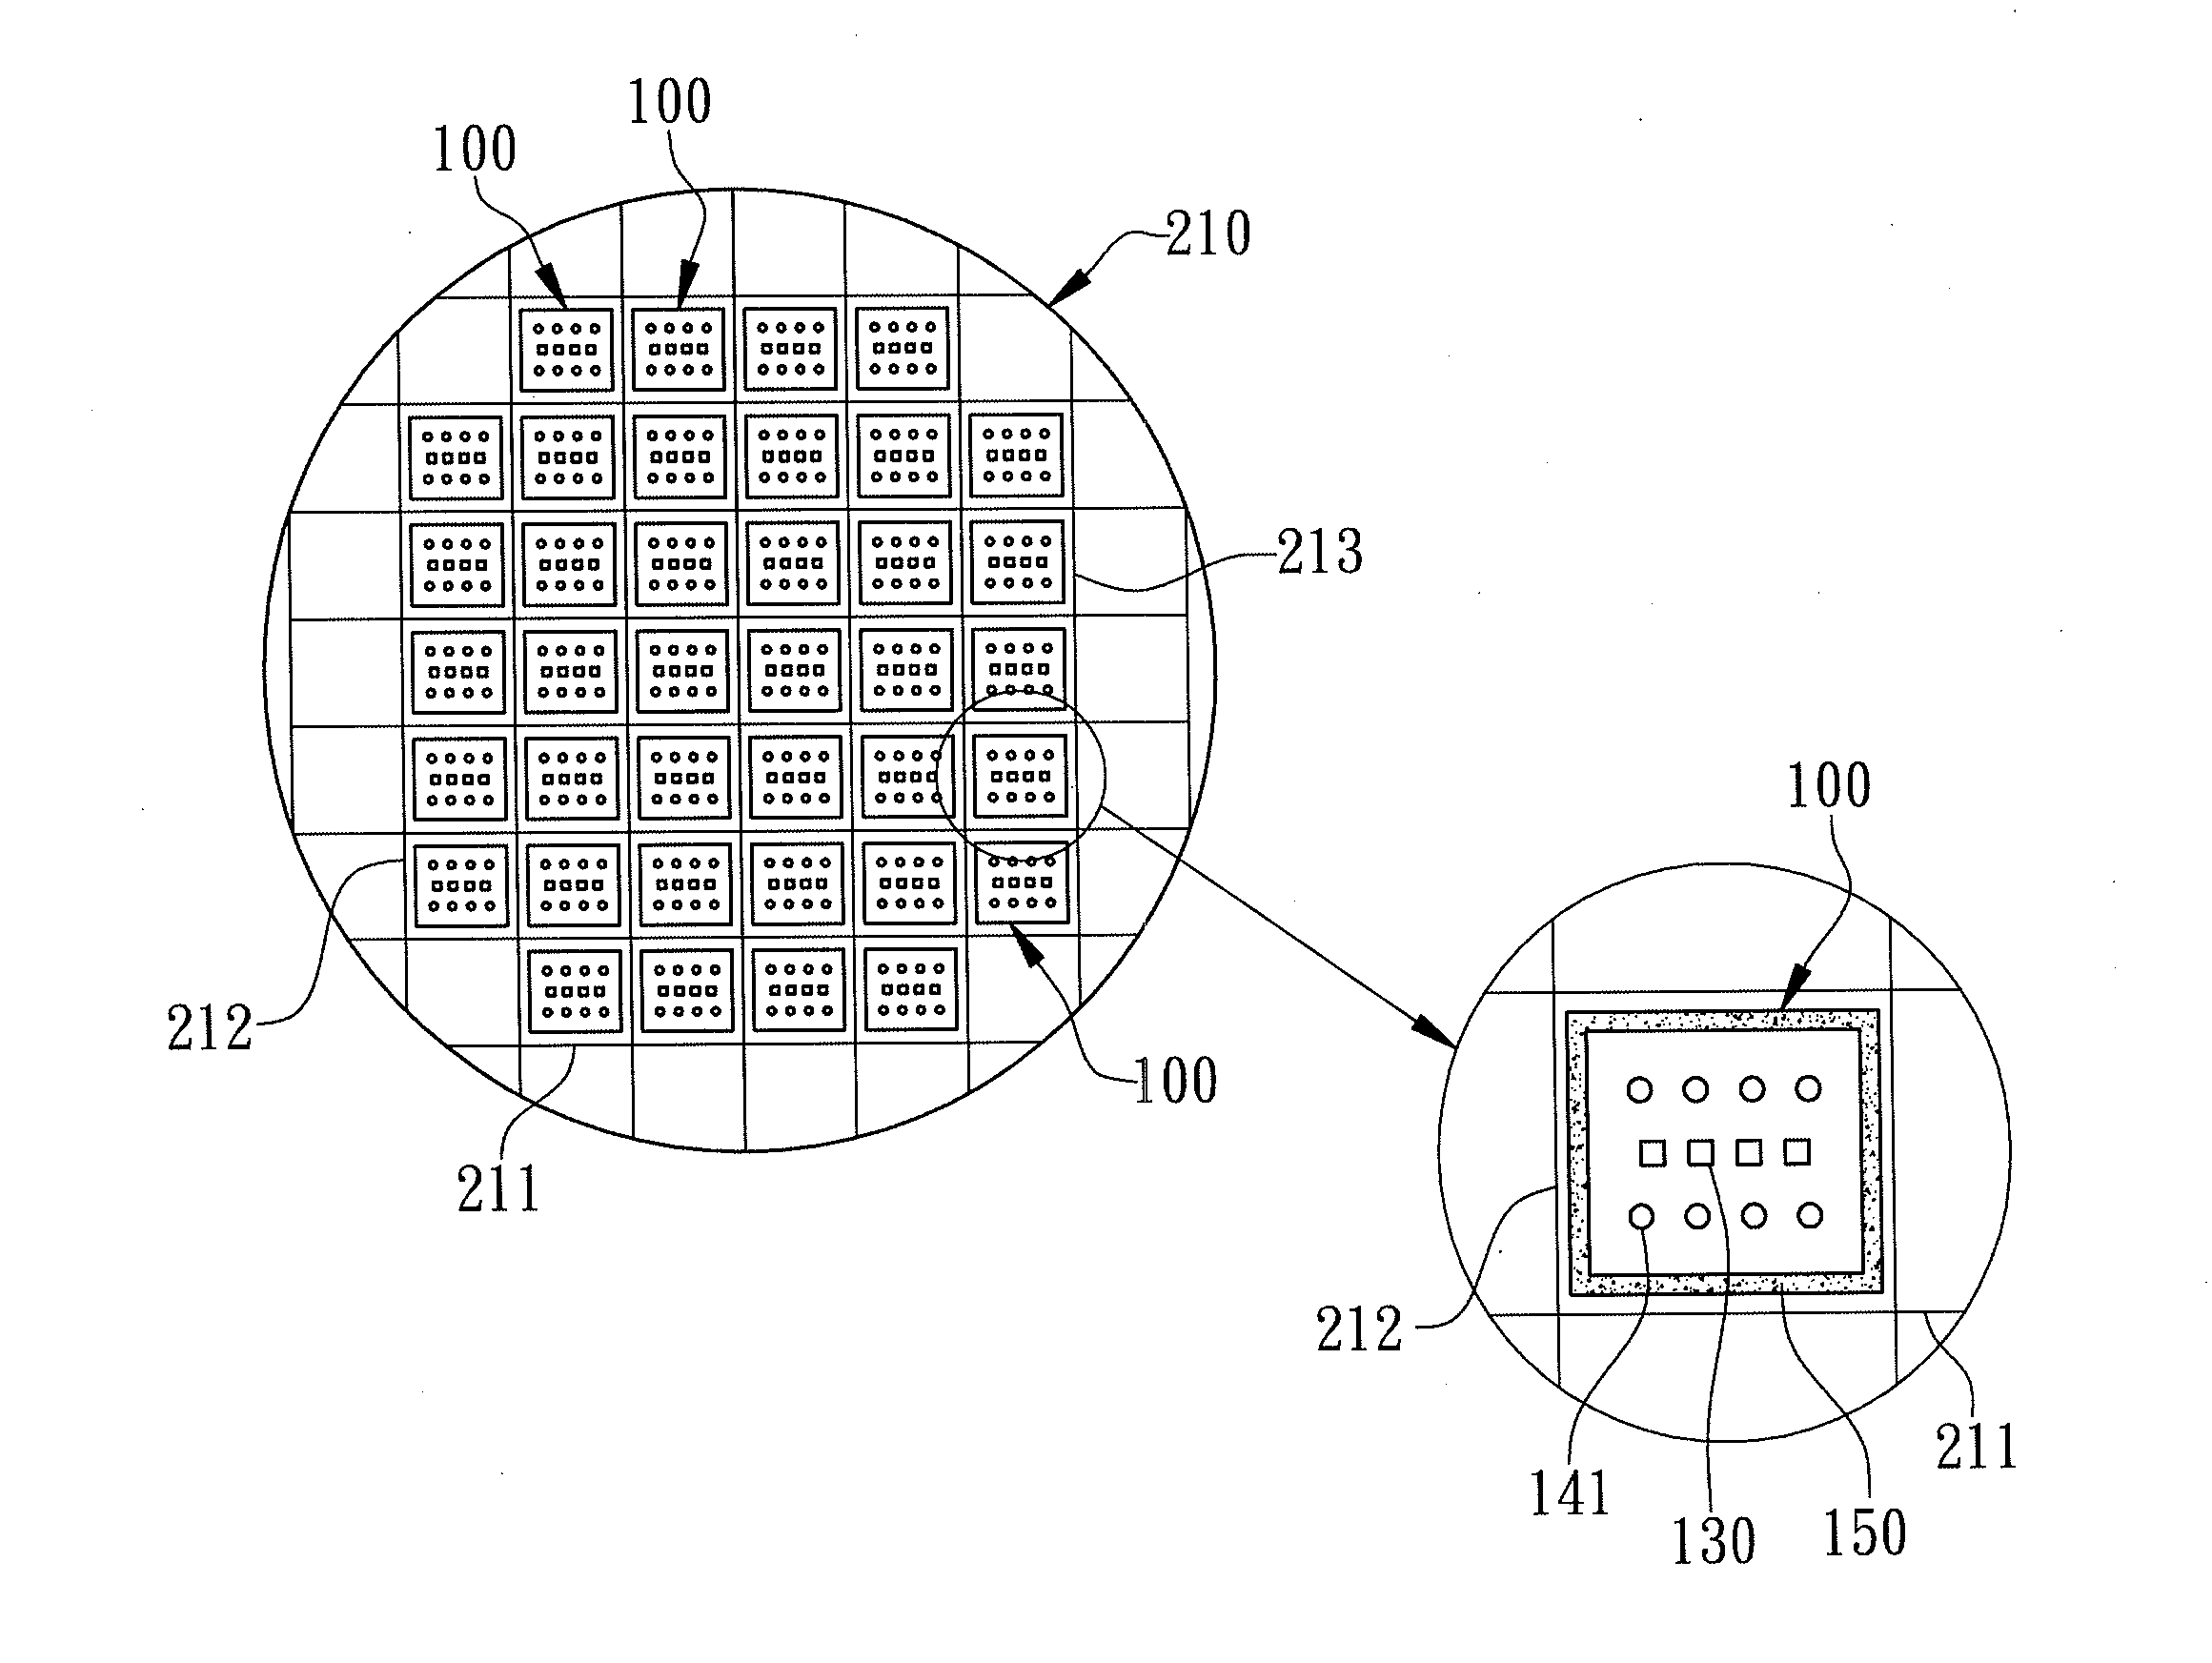 Method for wafer-level testing diced multi-chip stacked packages